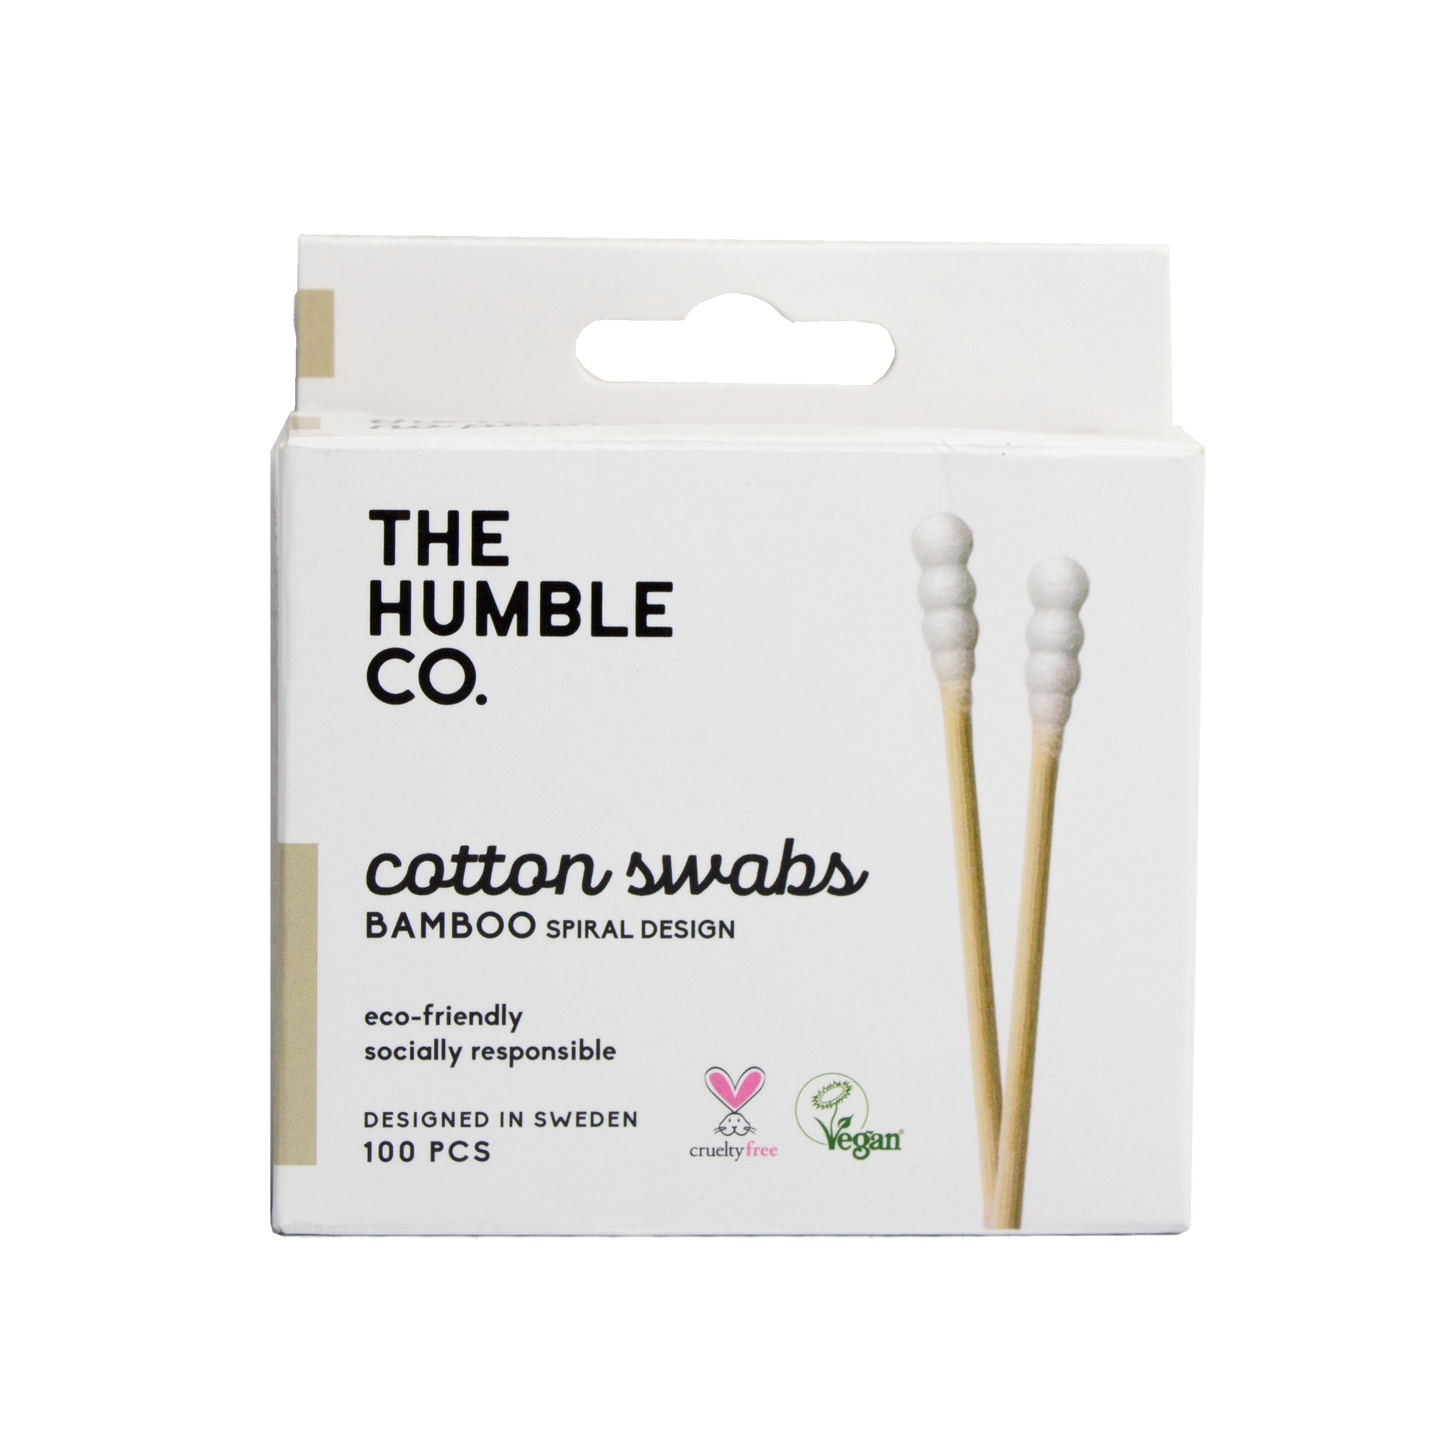 The Humble Co. - Cotton Swabs Bamboo Spiral Design